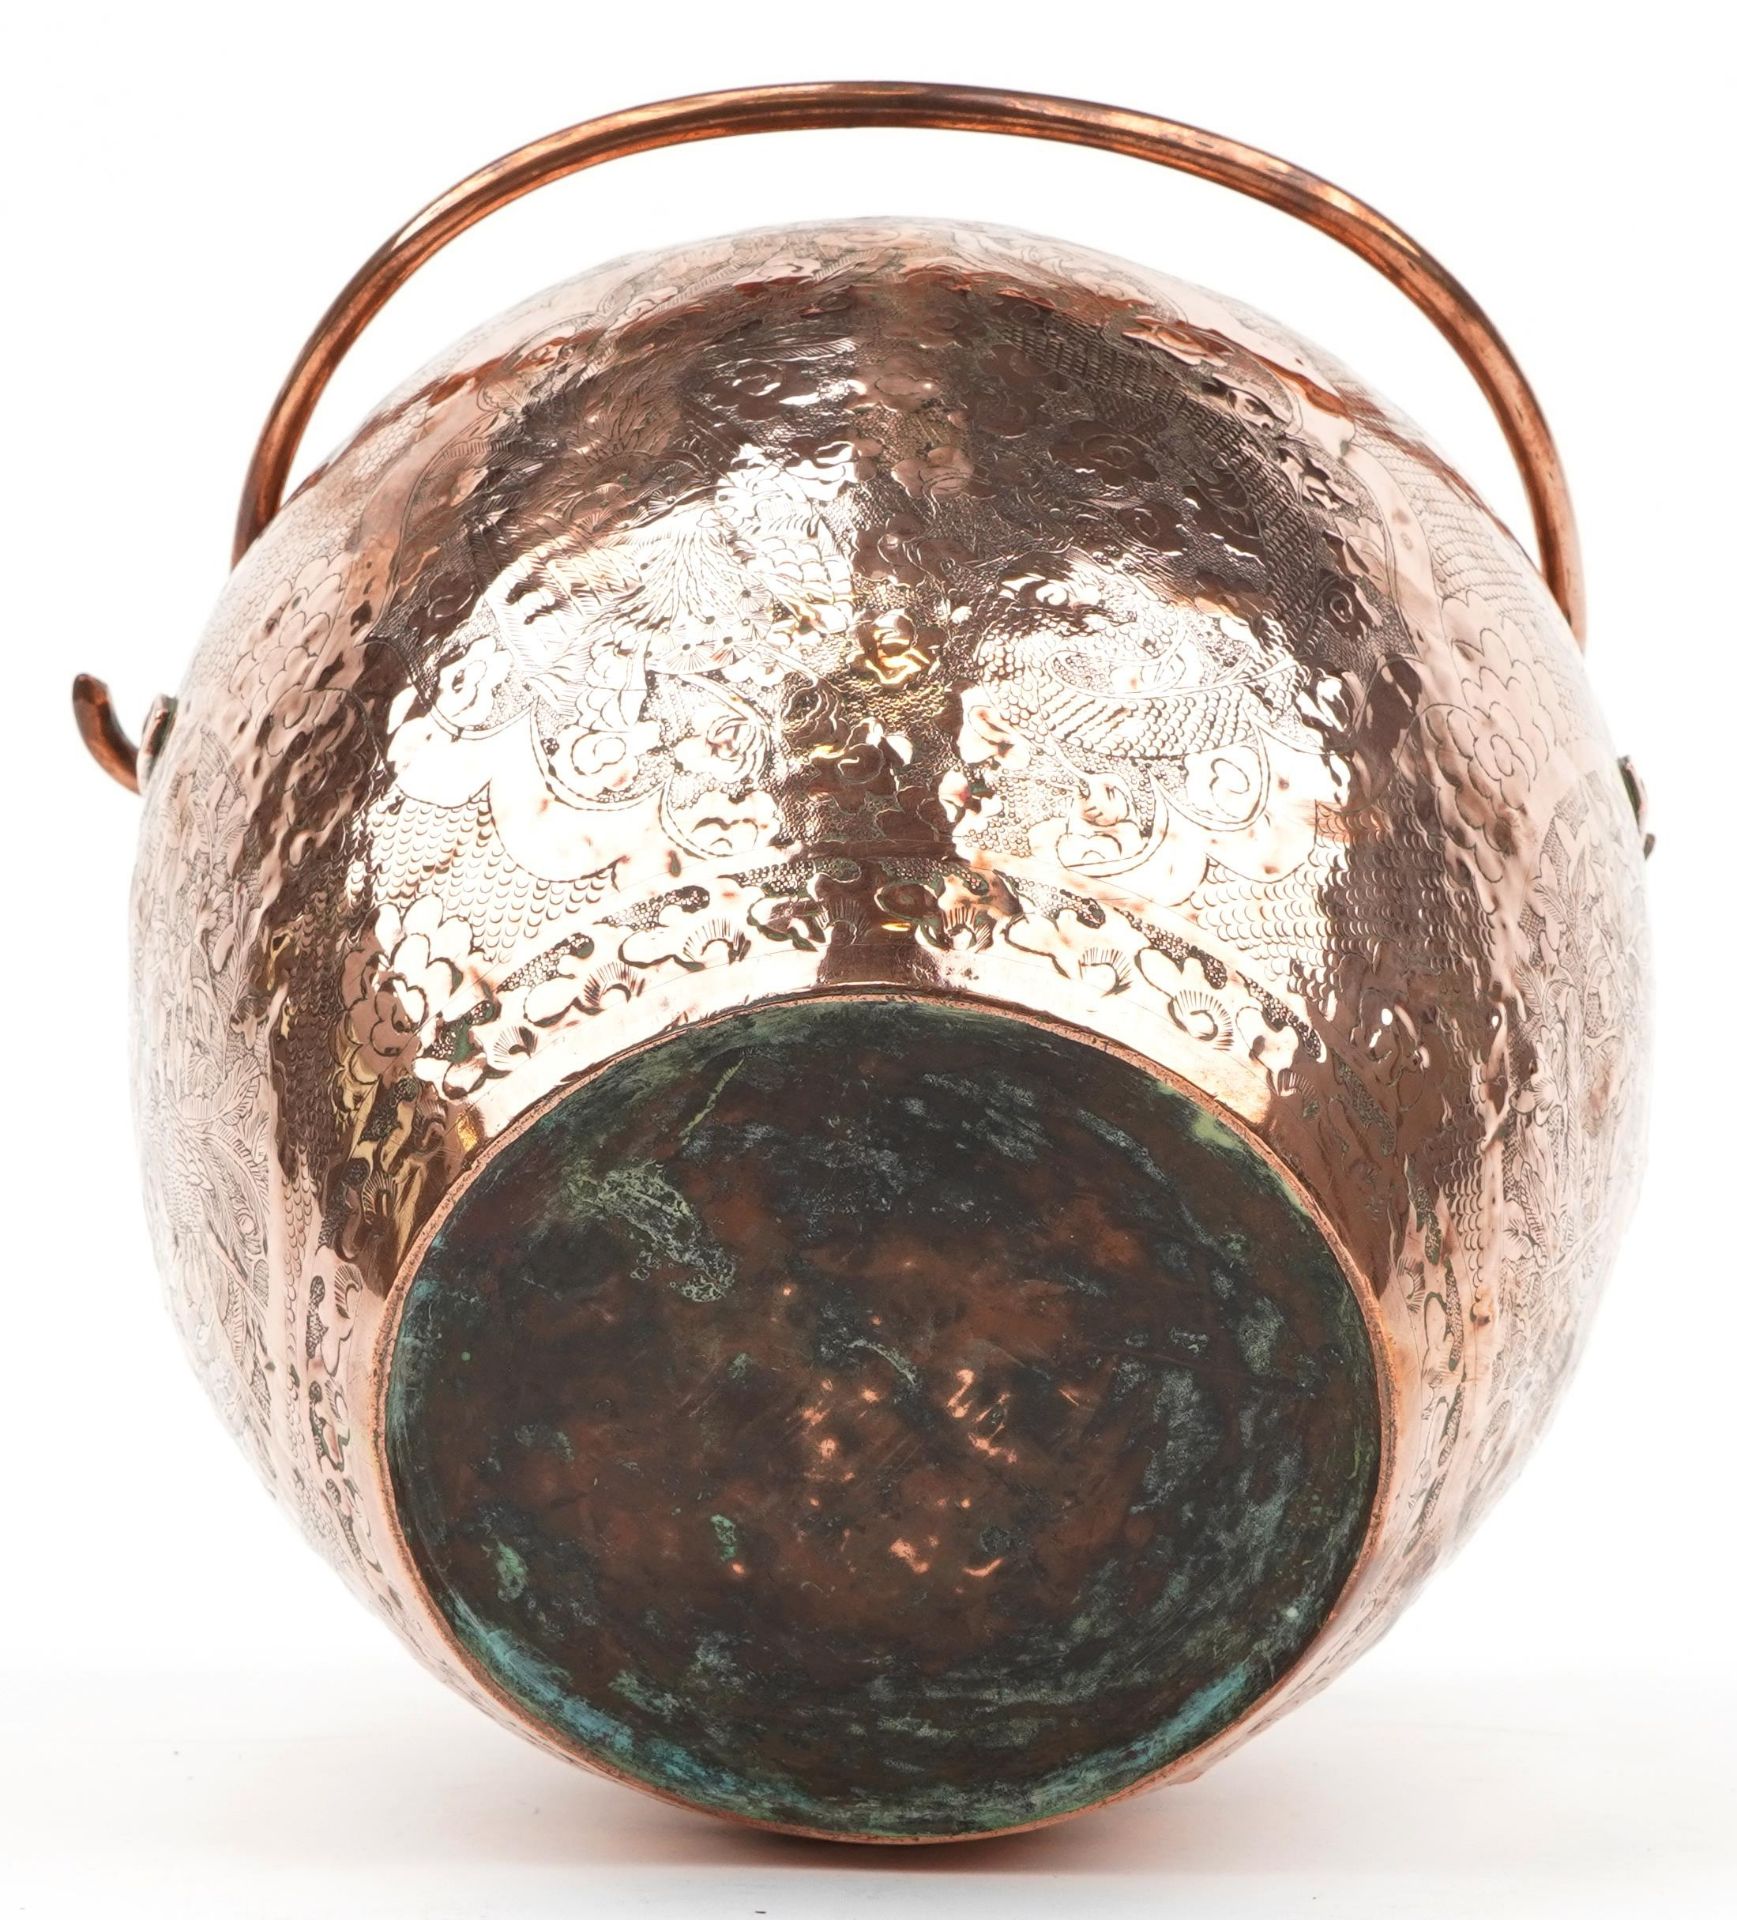 Indian copper hanging pot engraved with stylised flowers, 24cm high excluding the swing handle : For - Image 3 of 3